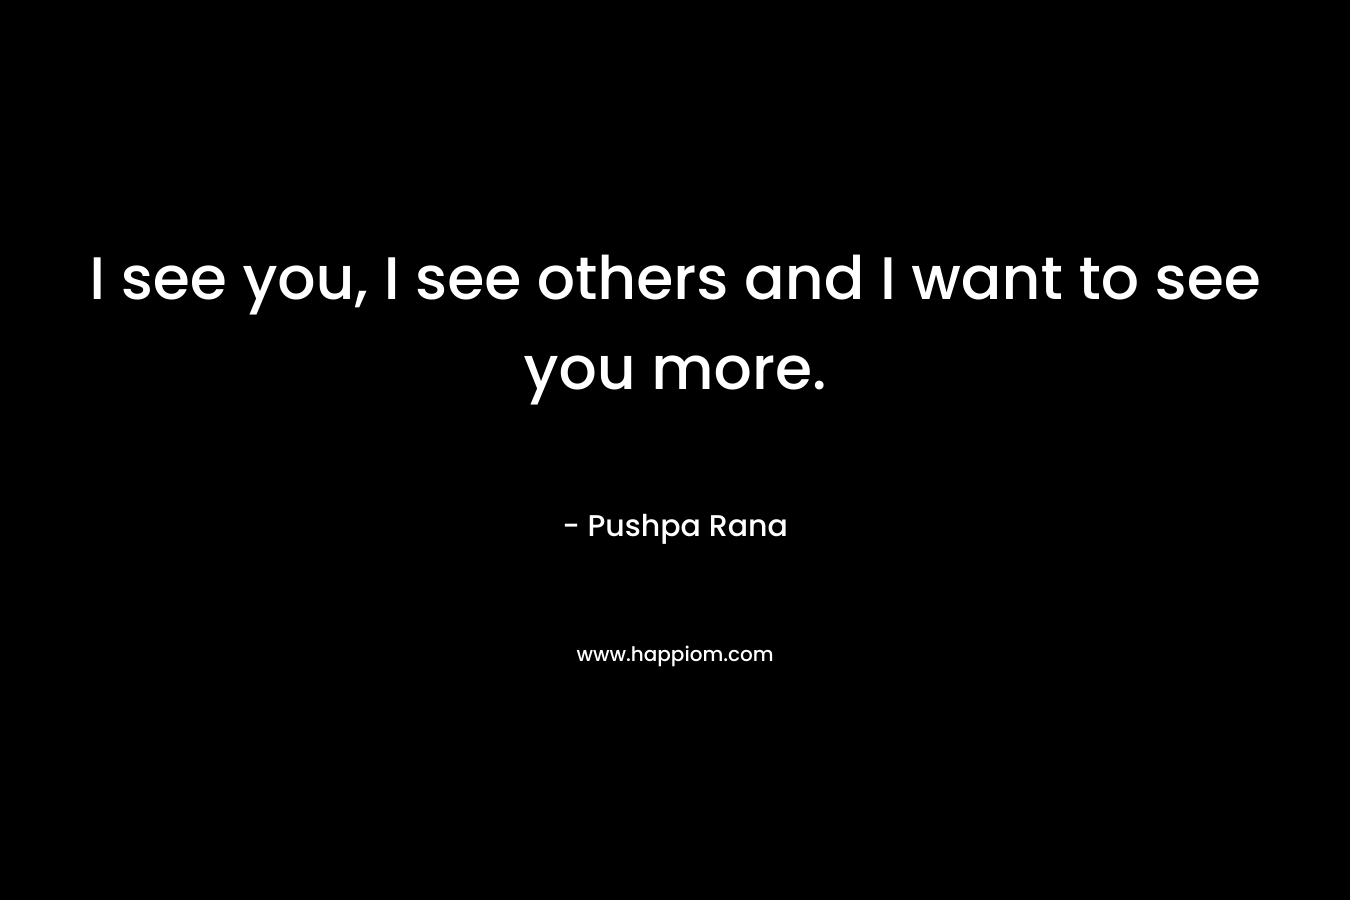 I see you, I see others and I want to see you more. – Pushpa Rana